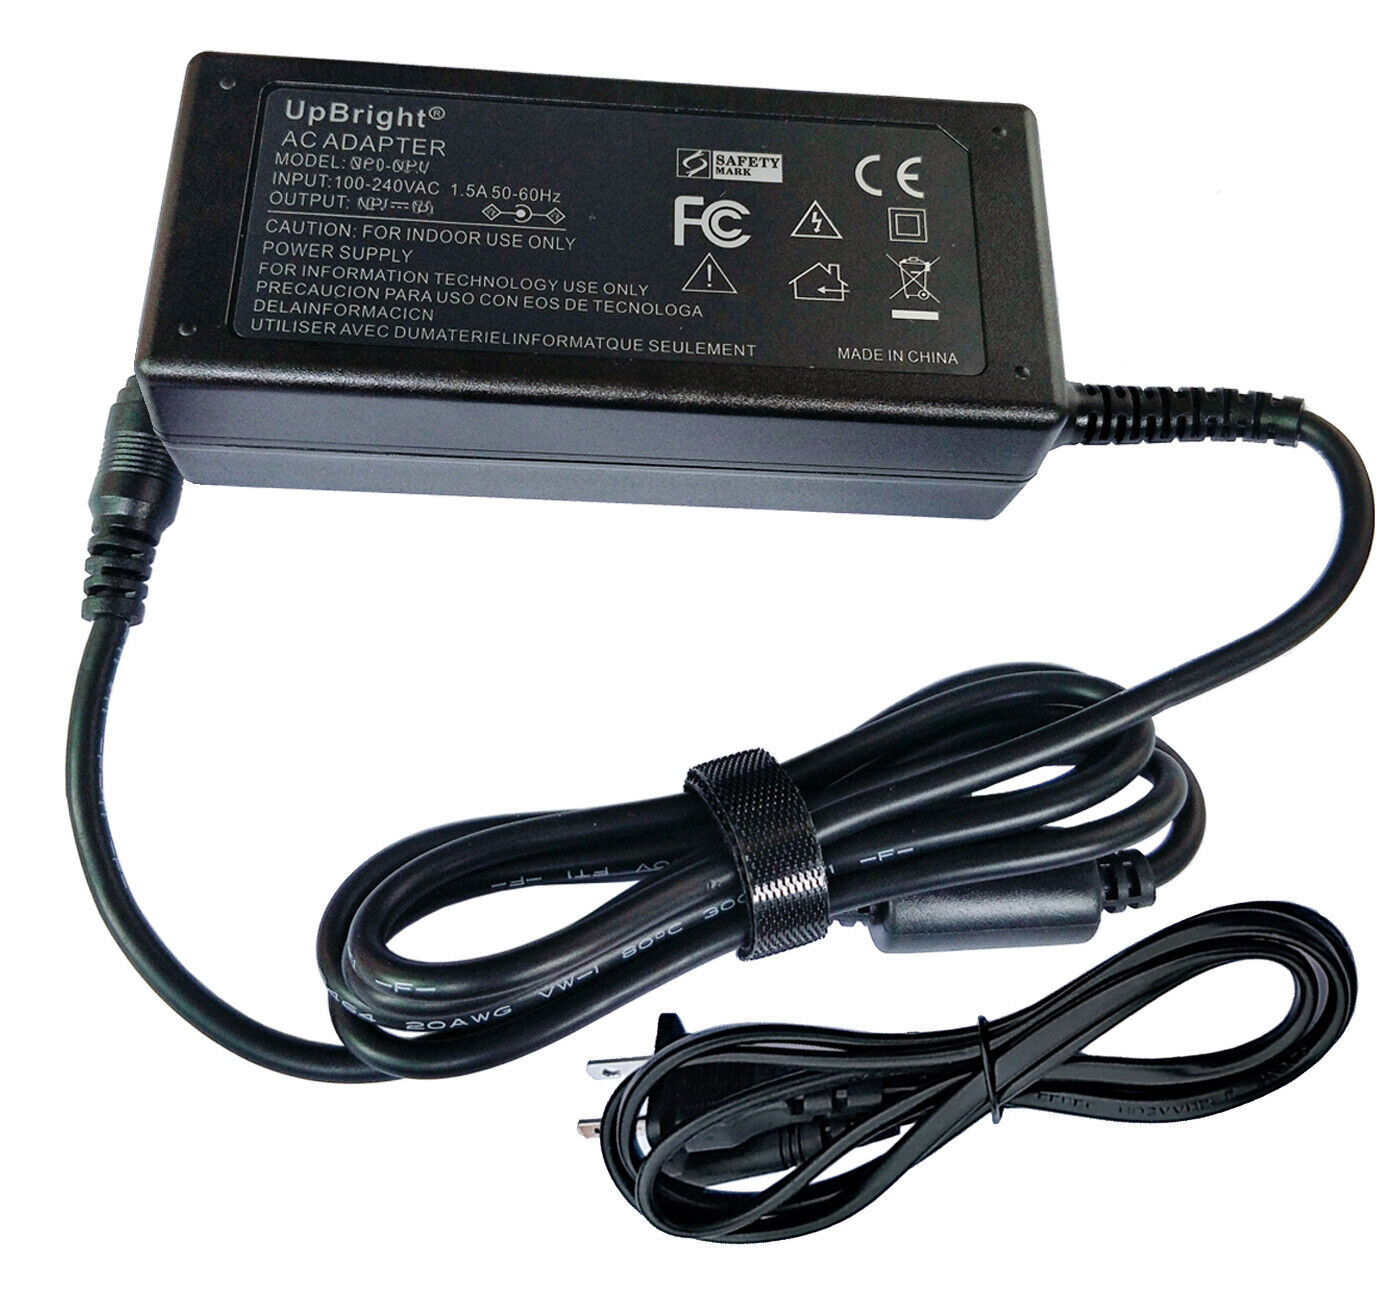 AC Adapter For AtGames Legends Ultimate Home Arcade Cabinet Machine Power Supply